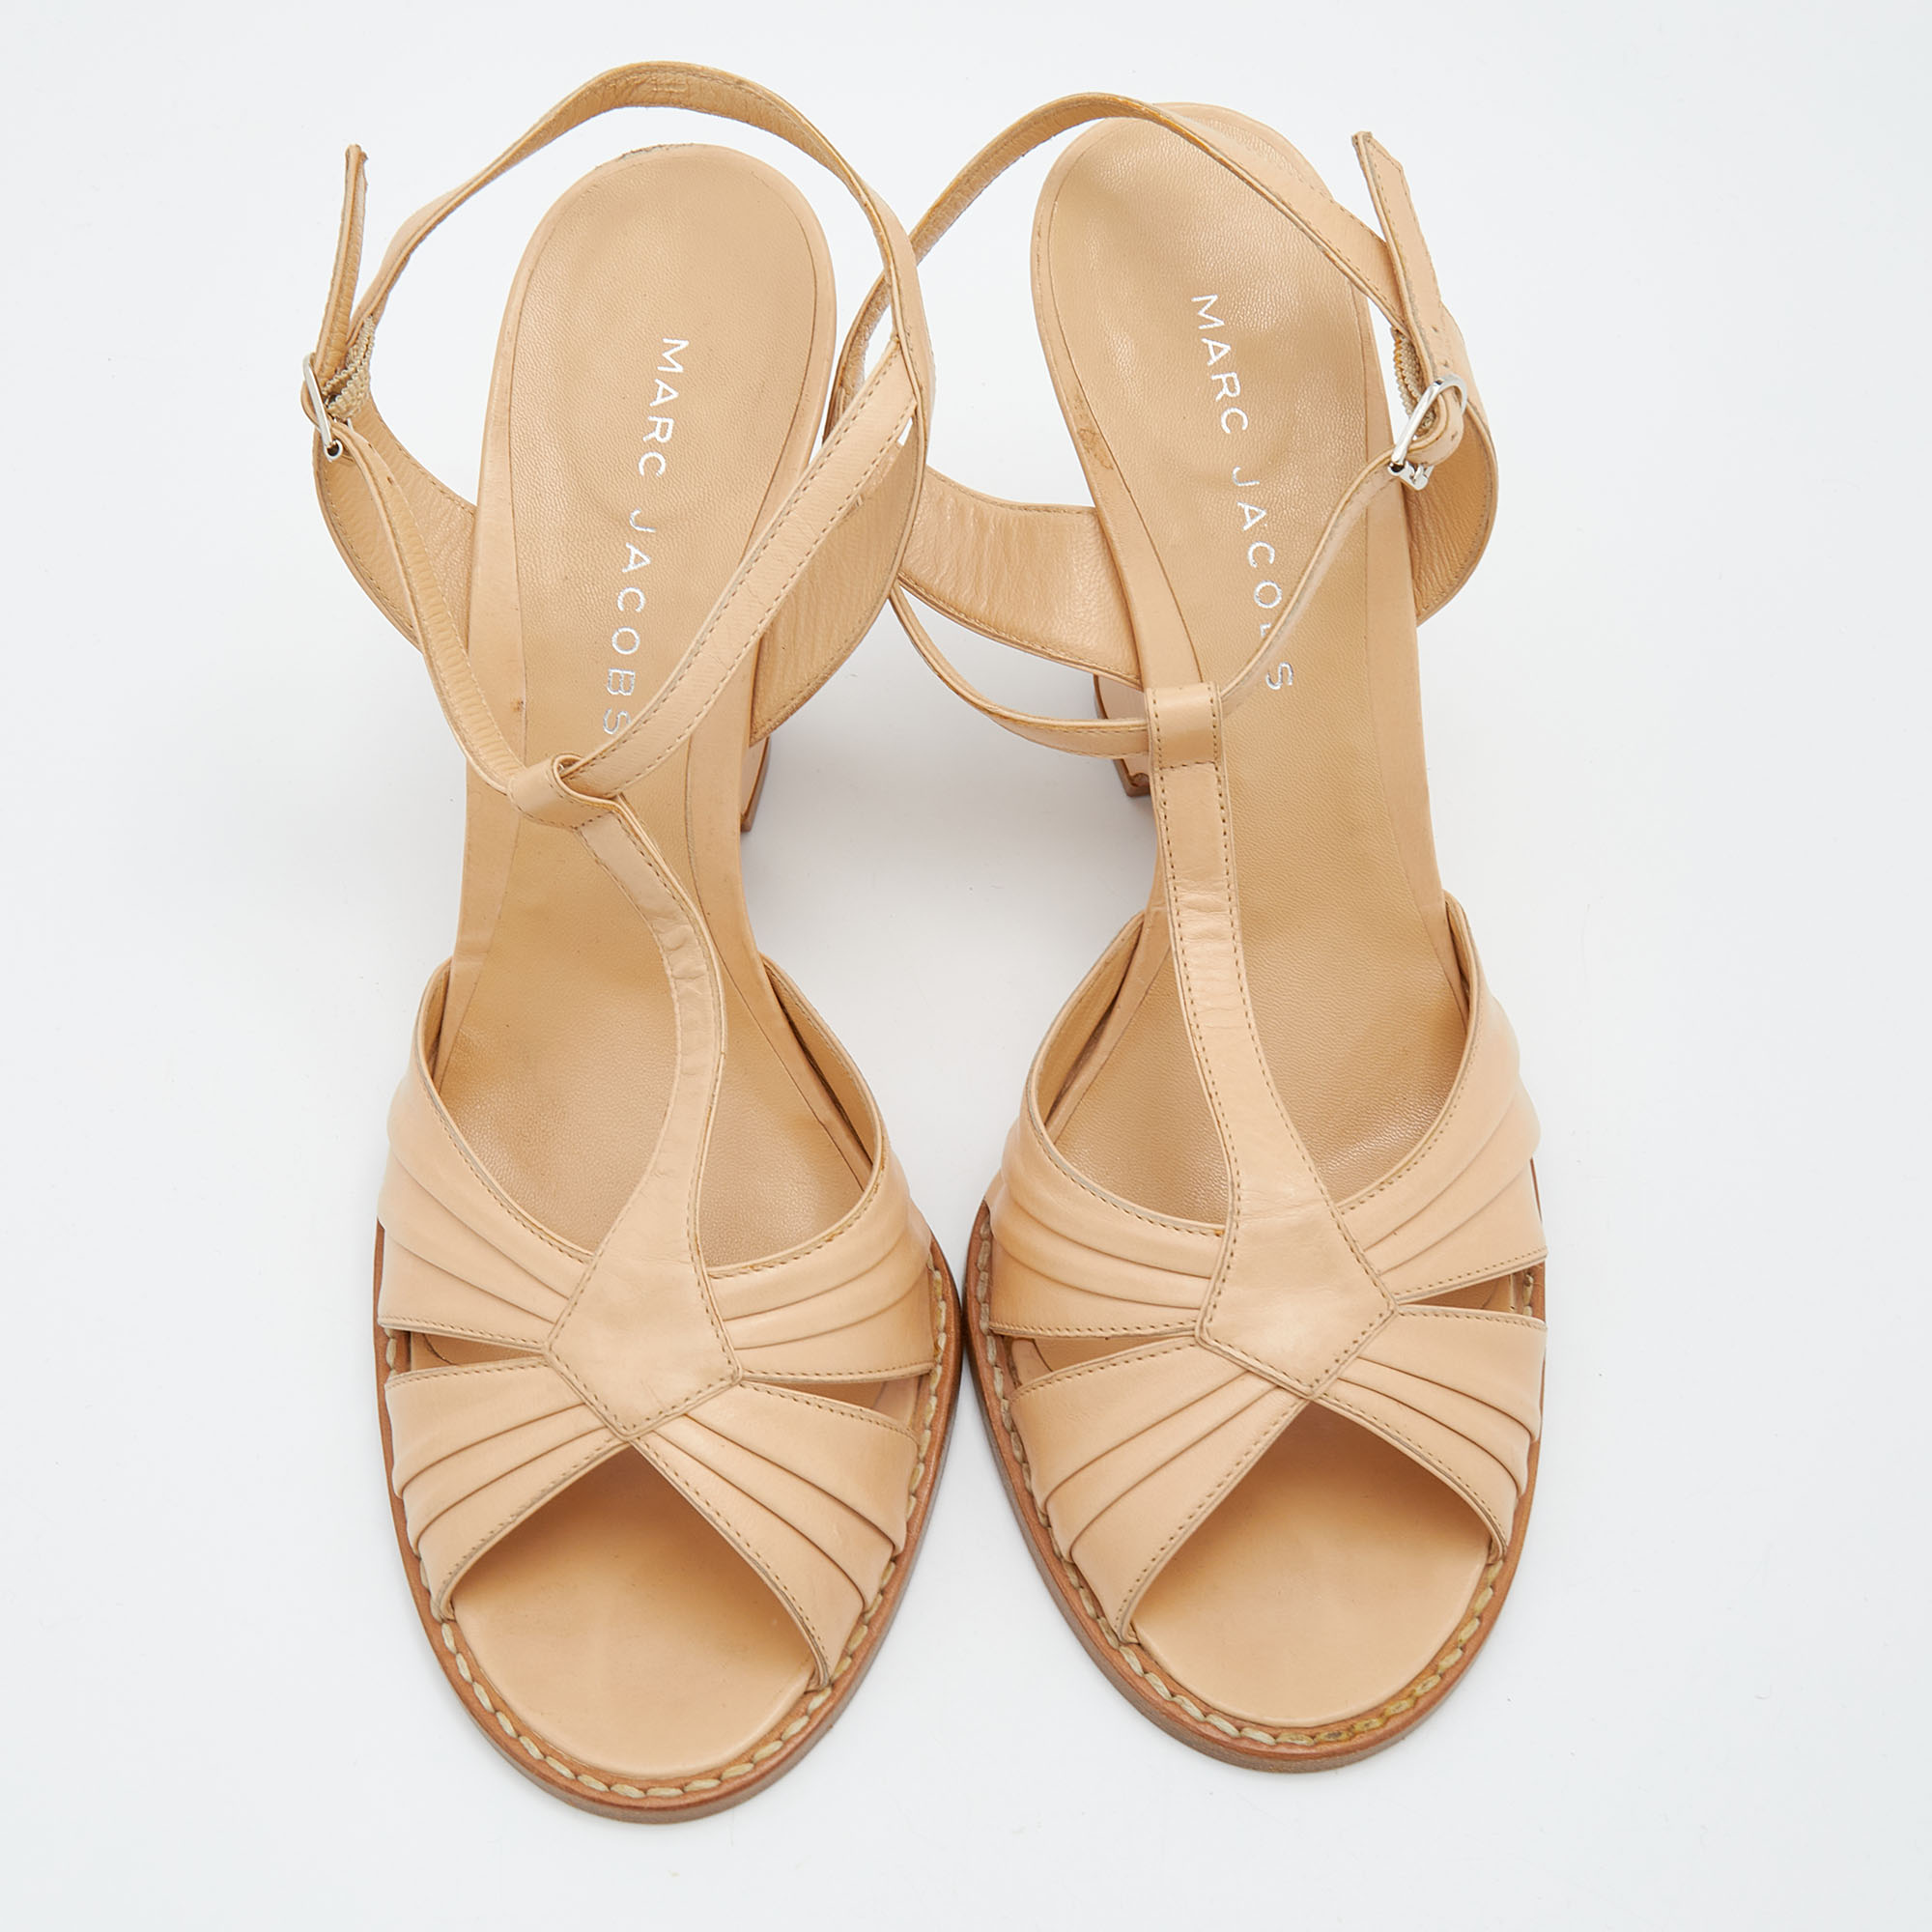 Marc Jacobs Beige Leather Ankle Strap Wedge Sandals Size 39.5